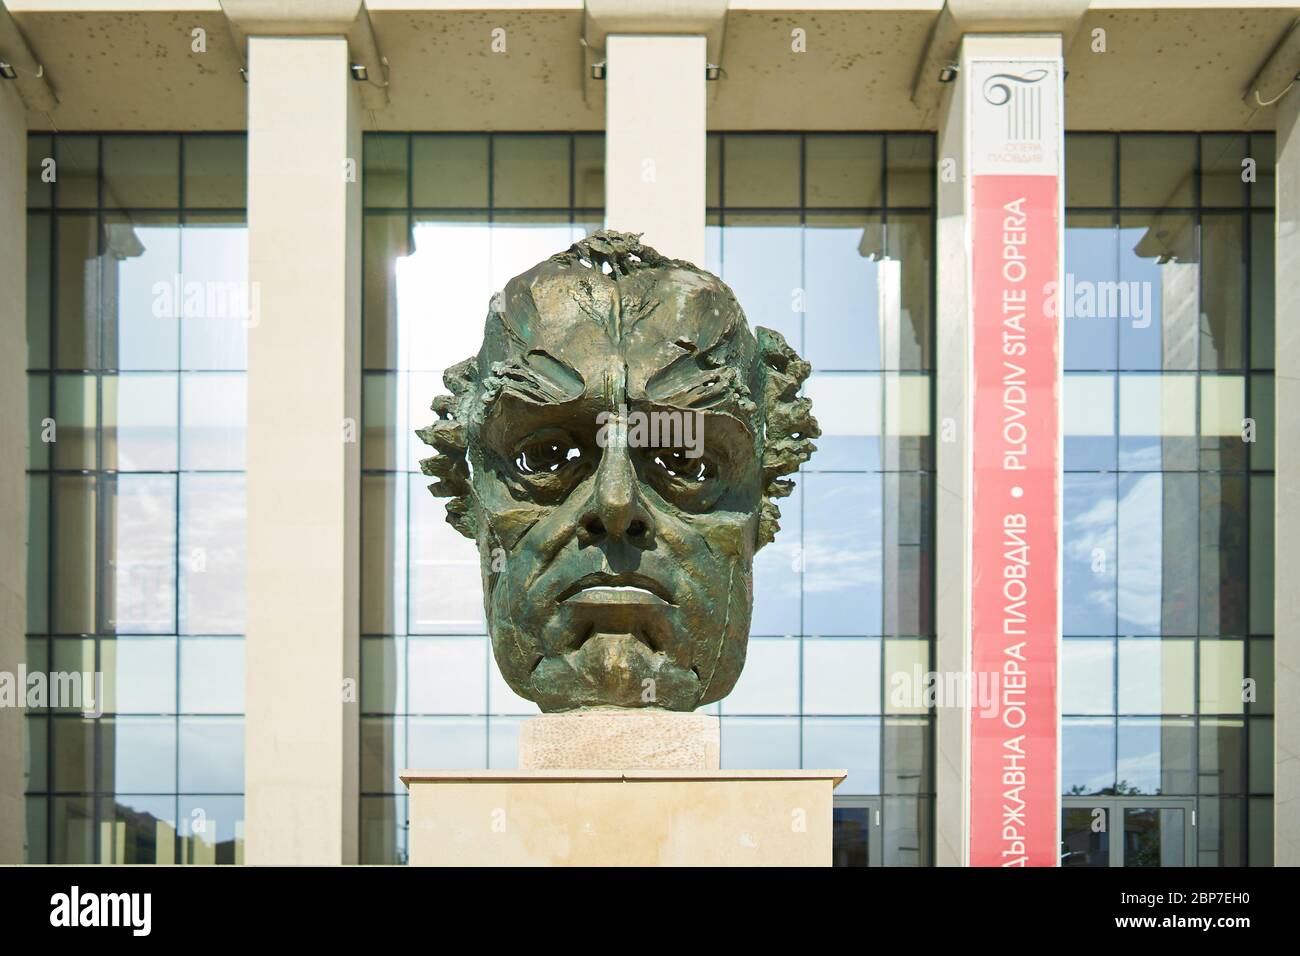 PLOVDIV, BULGARIA - JULY 02, 2019: Bust of Boris Christoff in front of the Boris Christoff House of Culture (Bulgarian opera singer). Stock Photo